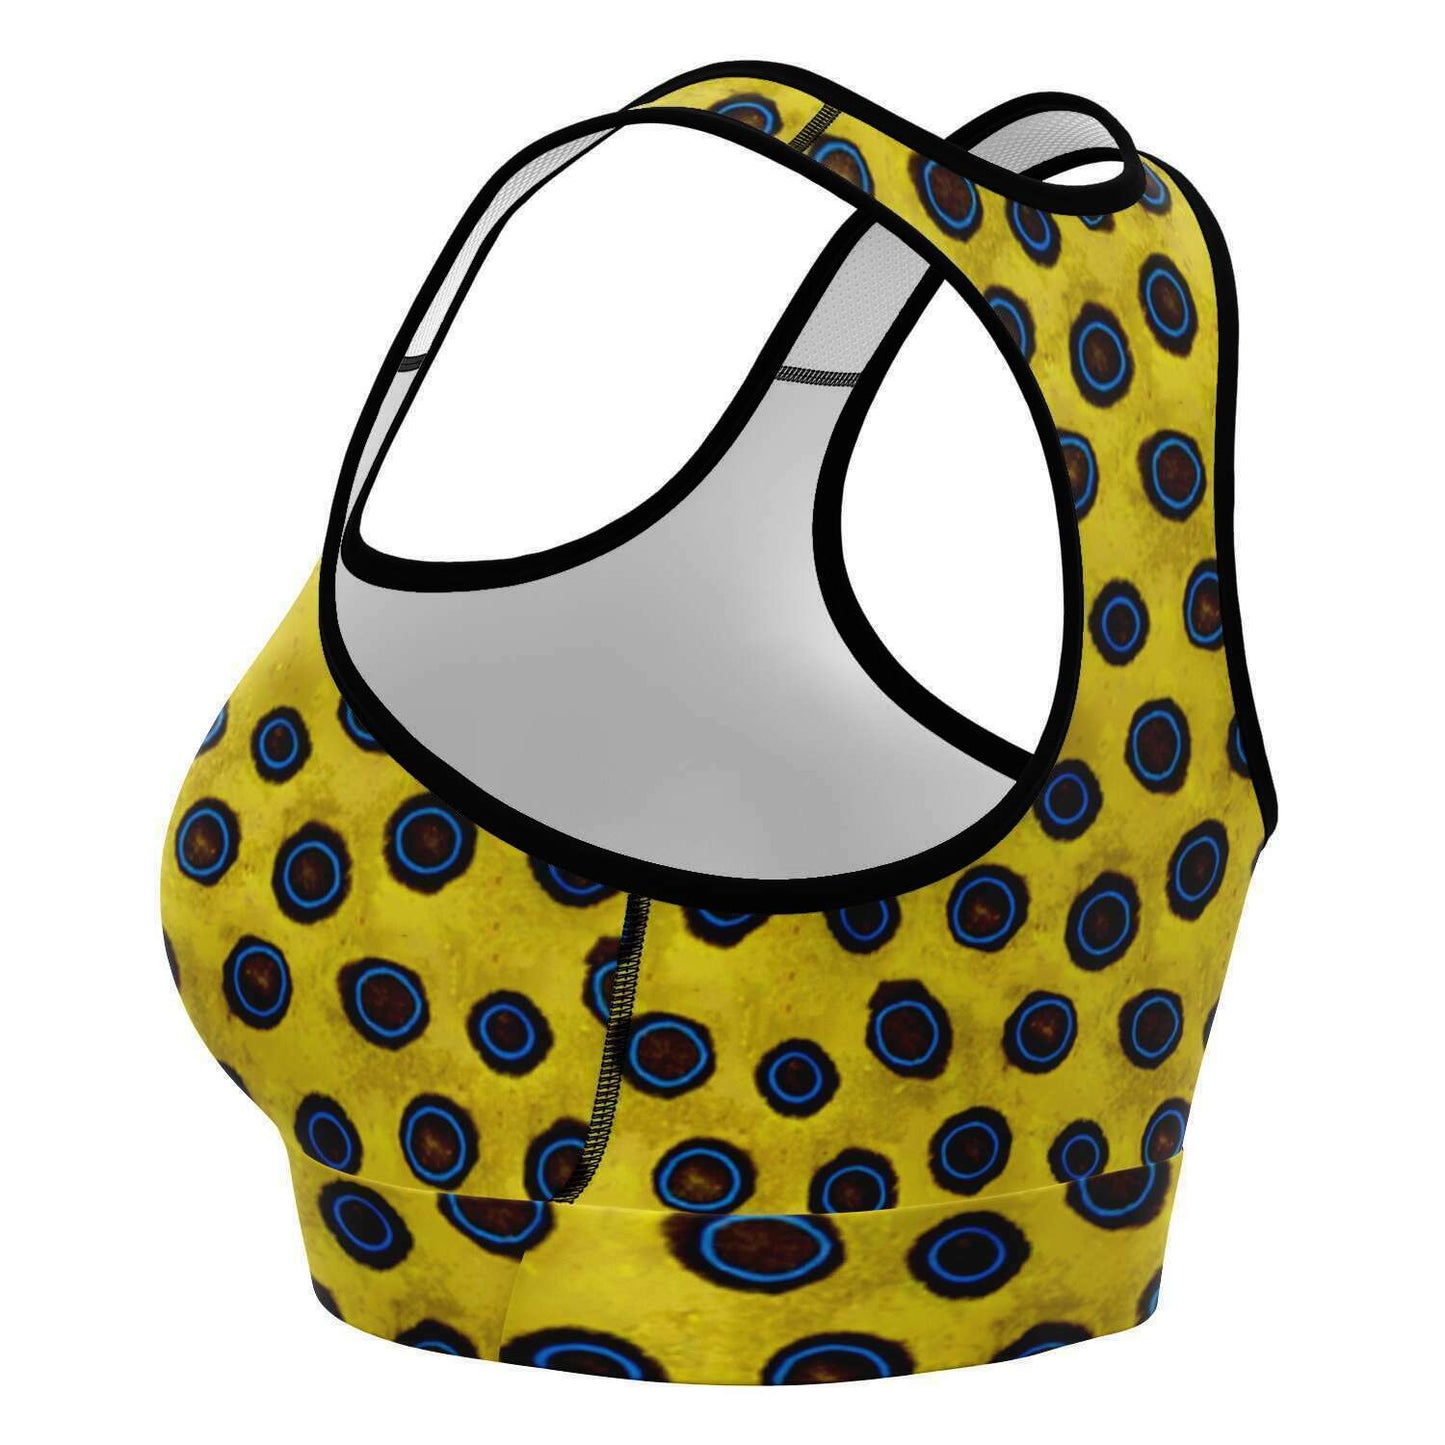 Blue-ringed octopus racer-back crop top / sports bra for any medium impact sport including scuba diving - view from side showing inside of product - no model